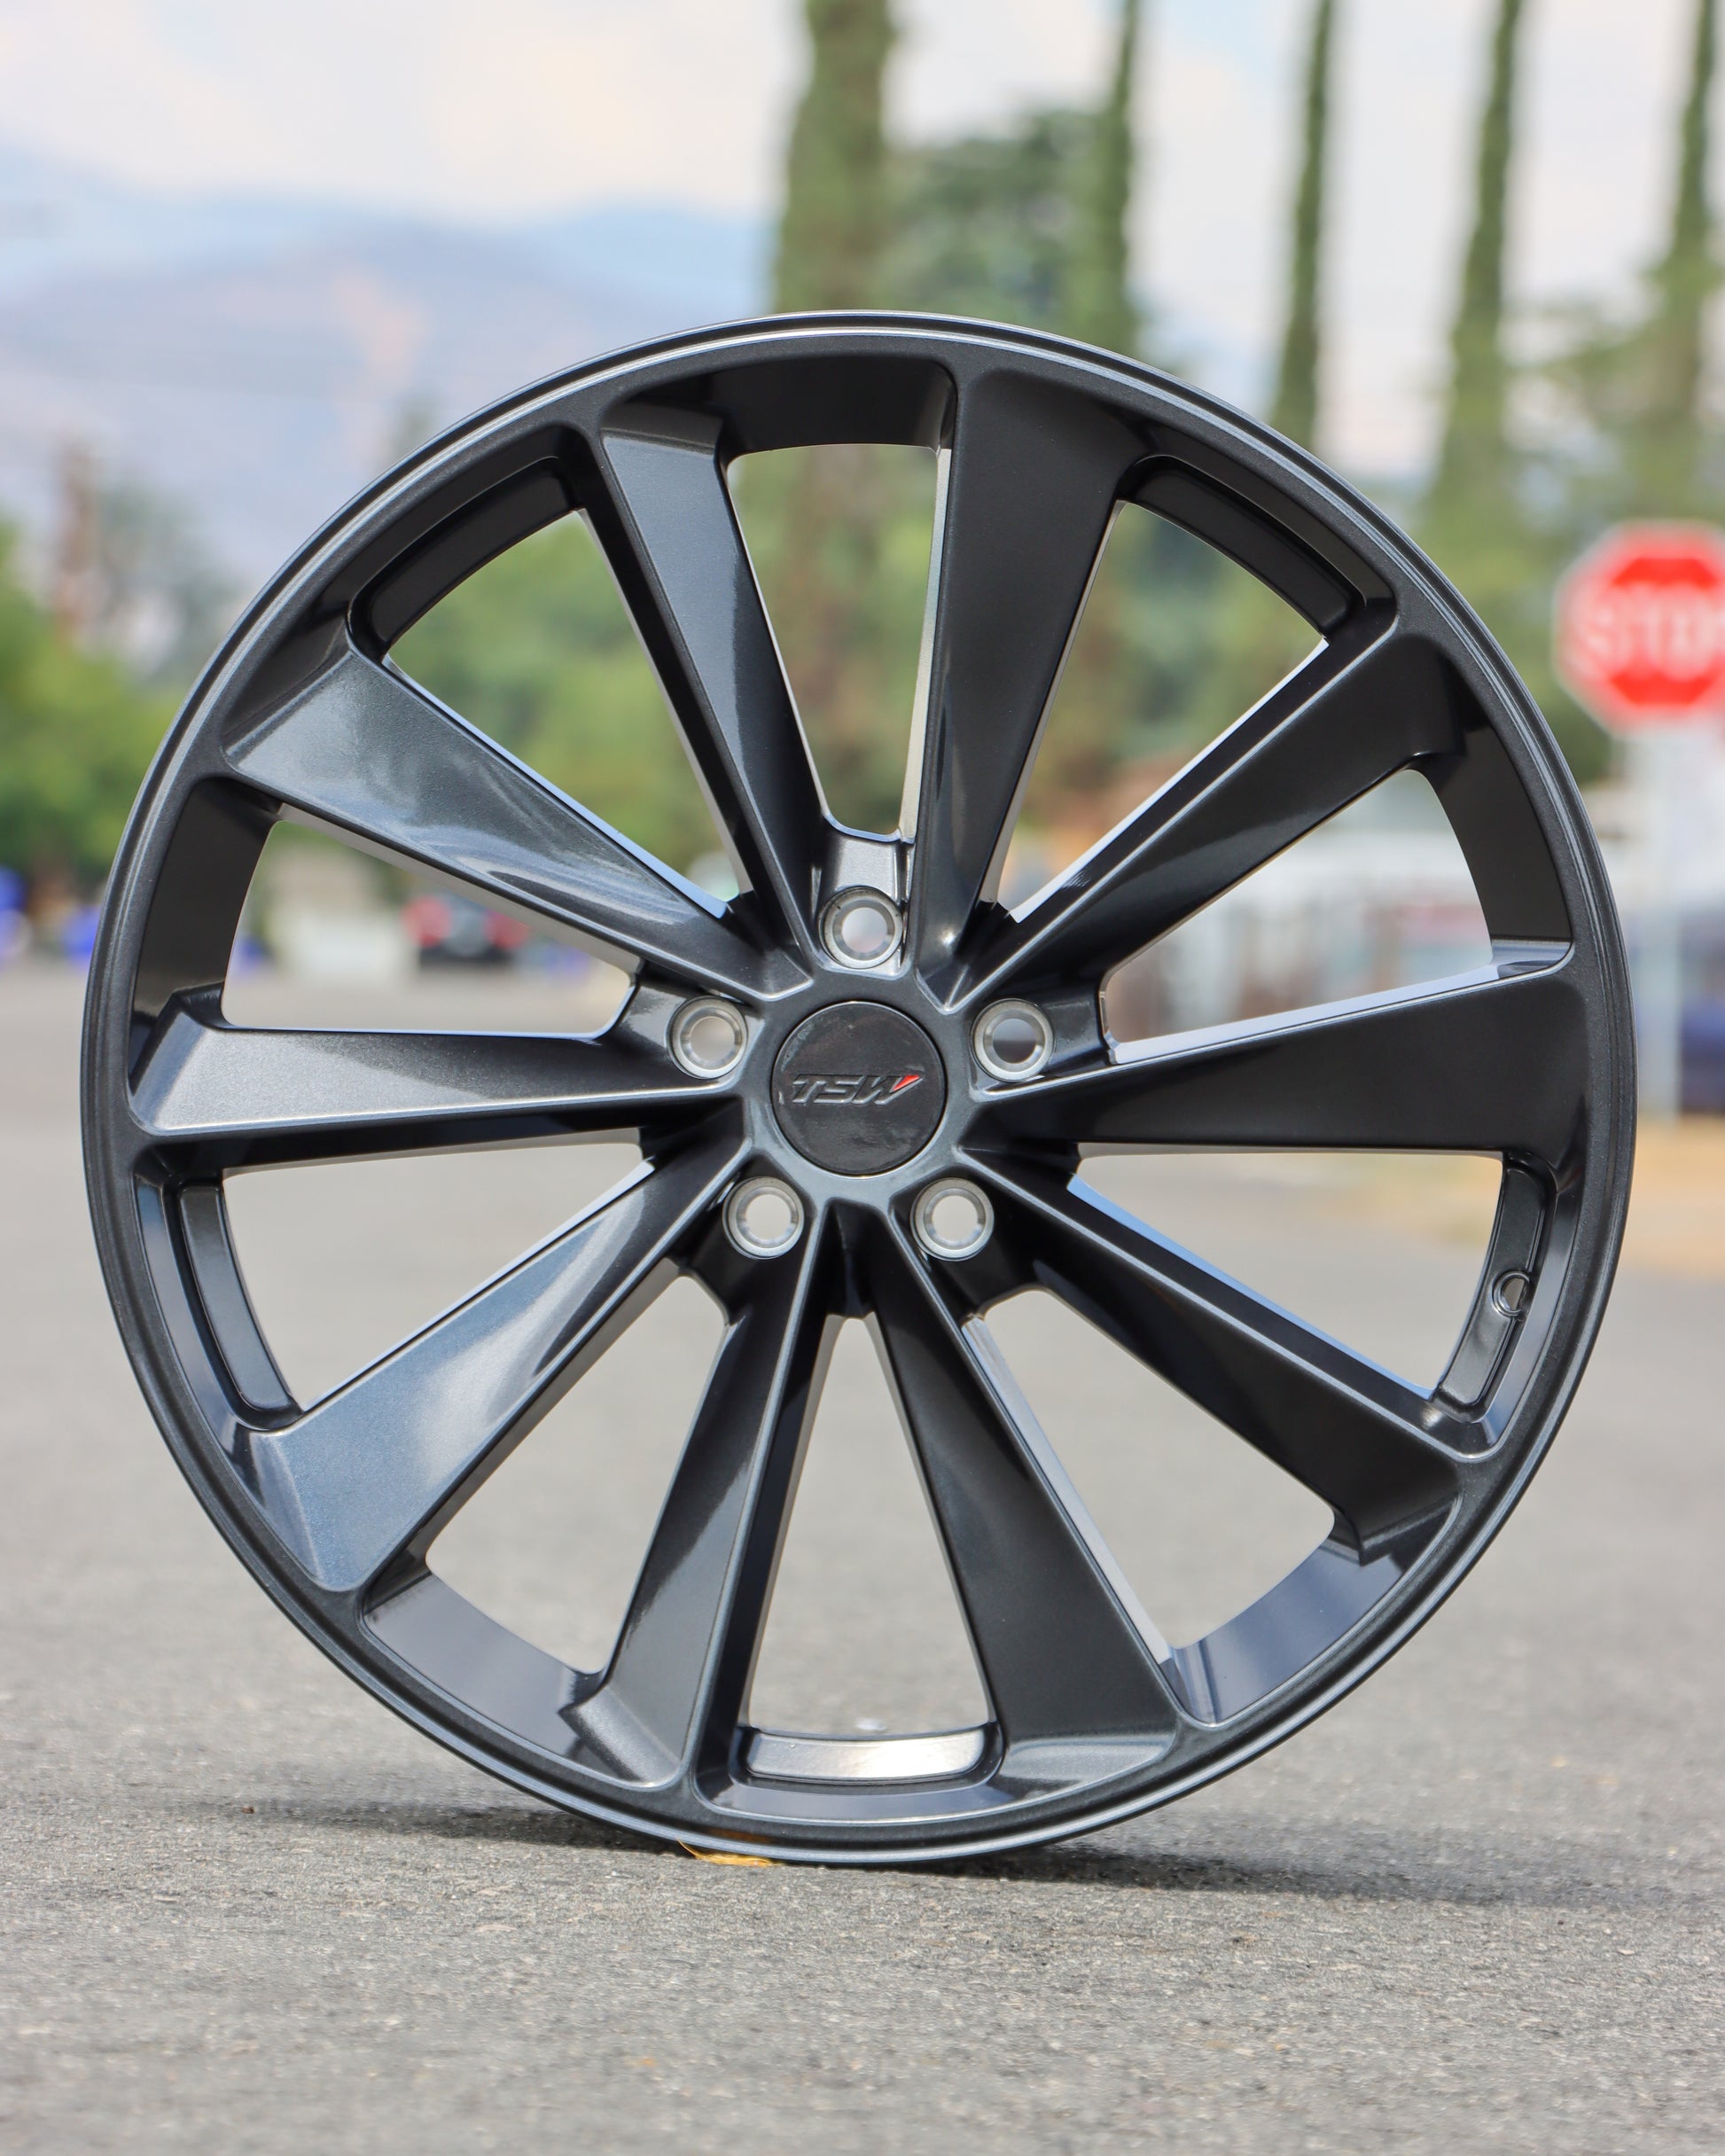 TSW Aileron Wheel in a gunmetal gray finish Sitting in the middle of the street with trees and a stop sign in the background.